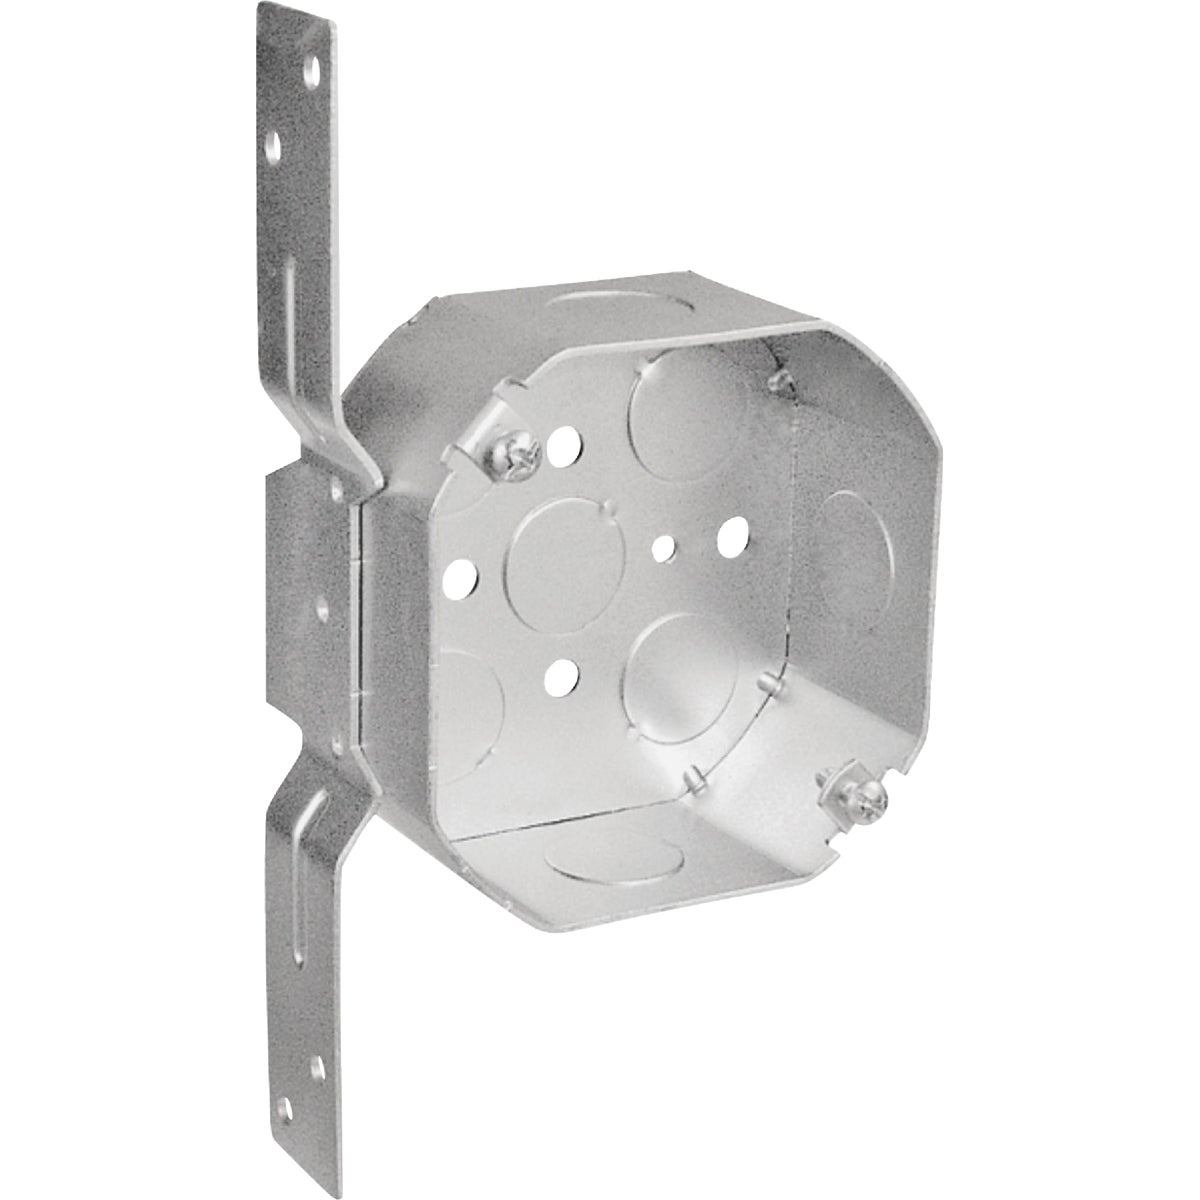 Southwire Bracket Mount 4 In. x 4 In. Octagon Box